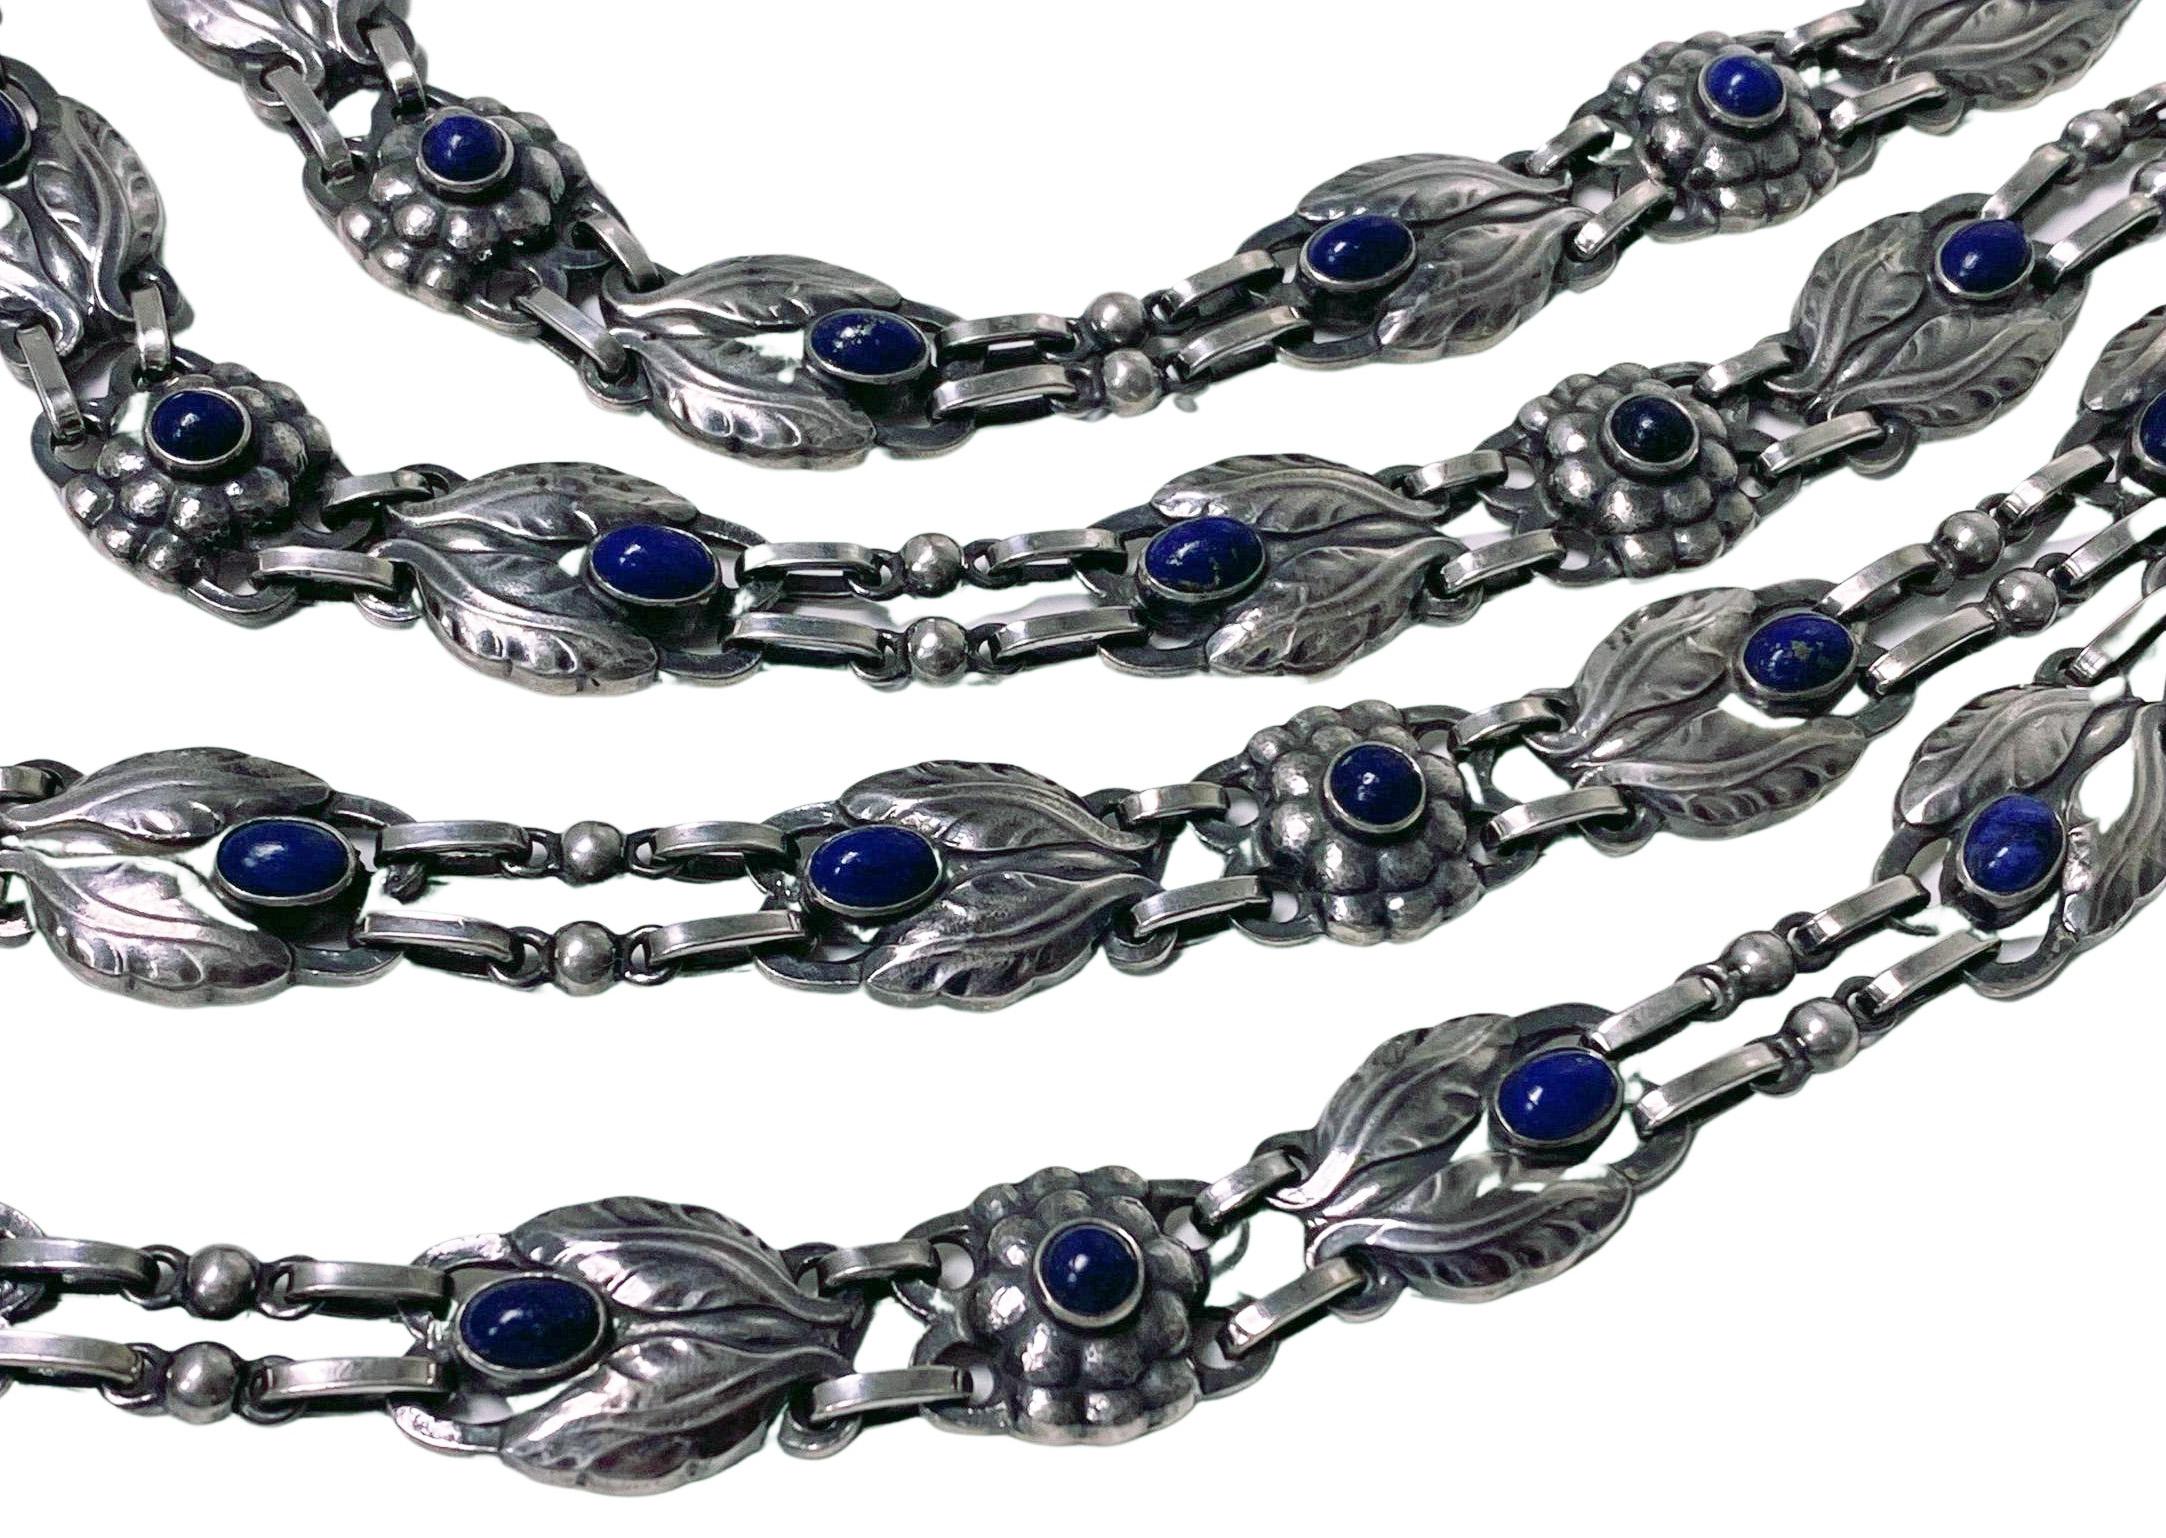 Georg Jensen 4 strand Lapis and Sterling Silver Necklace C.1933 For Sale 2